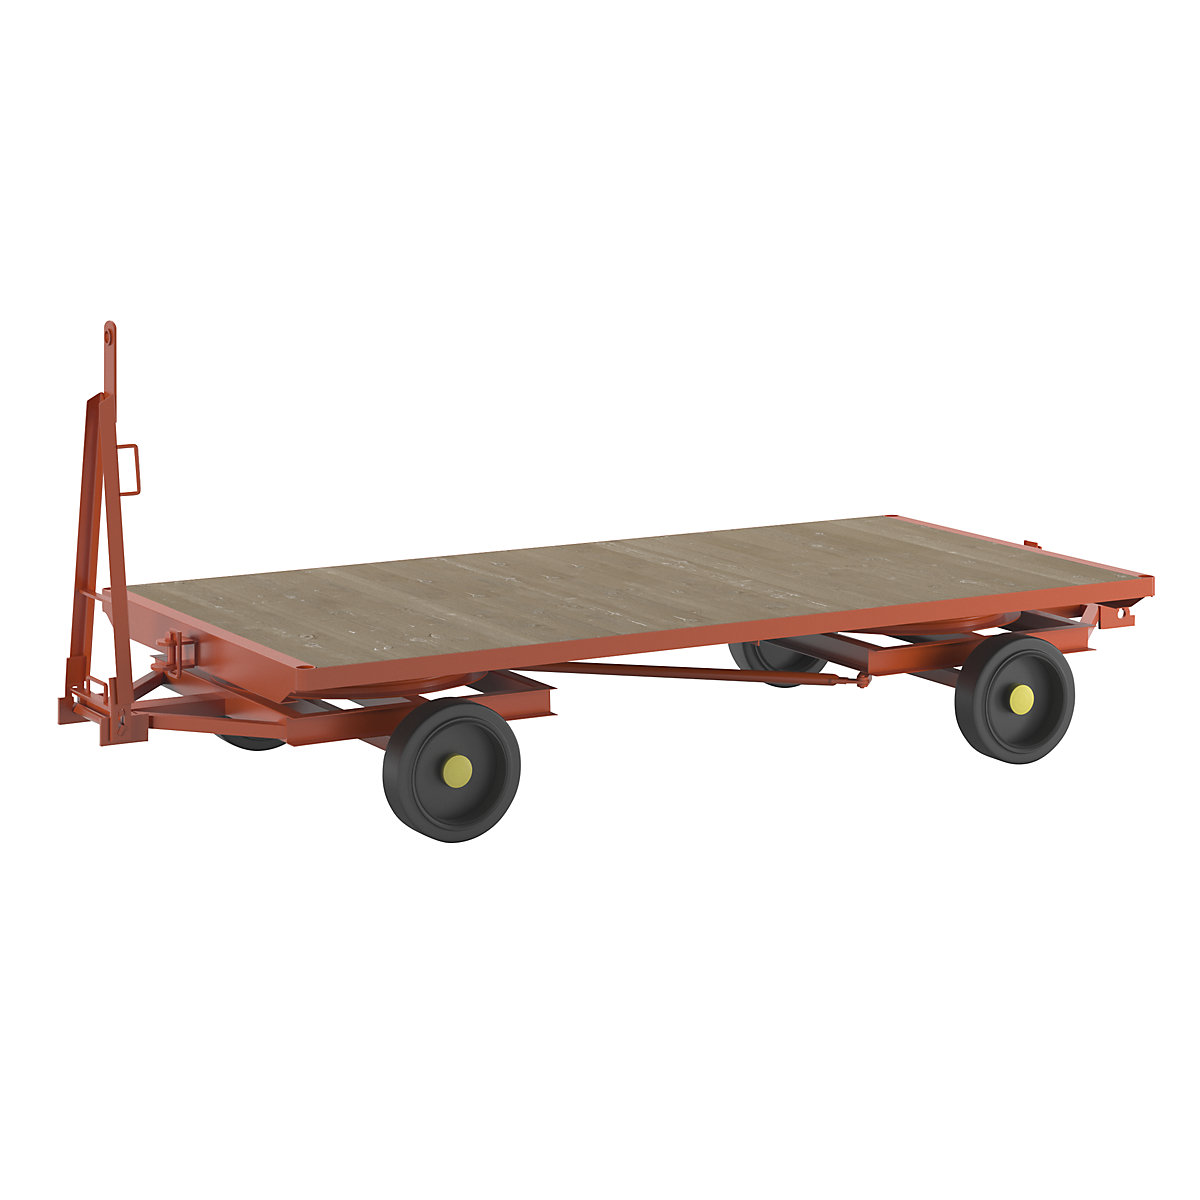 Trailer, 4-wheel double turntable steering, max. load 5 t, platform 3.0 x 1.5 m, solid rubber tyres-18